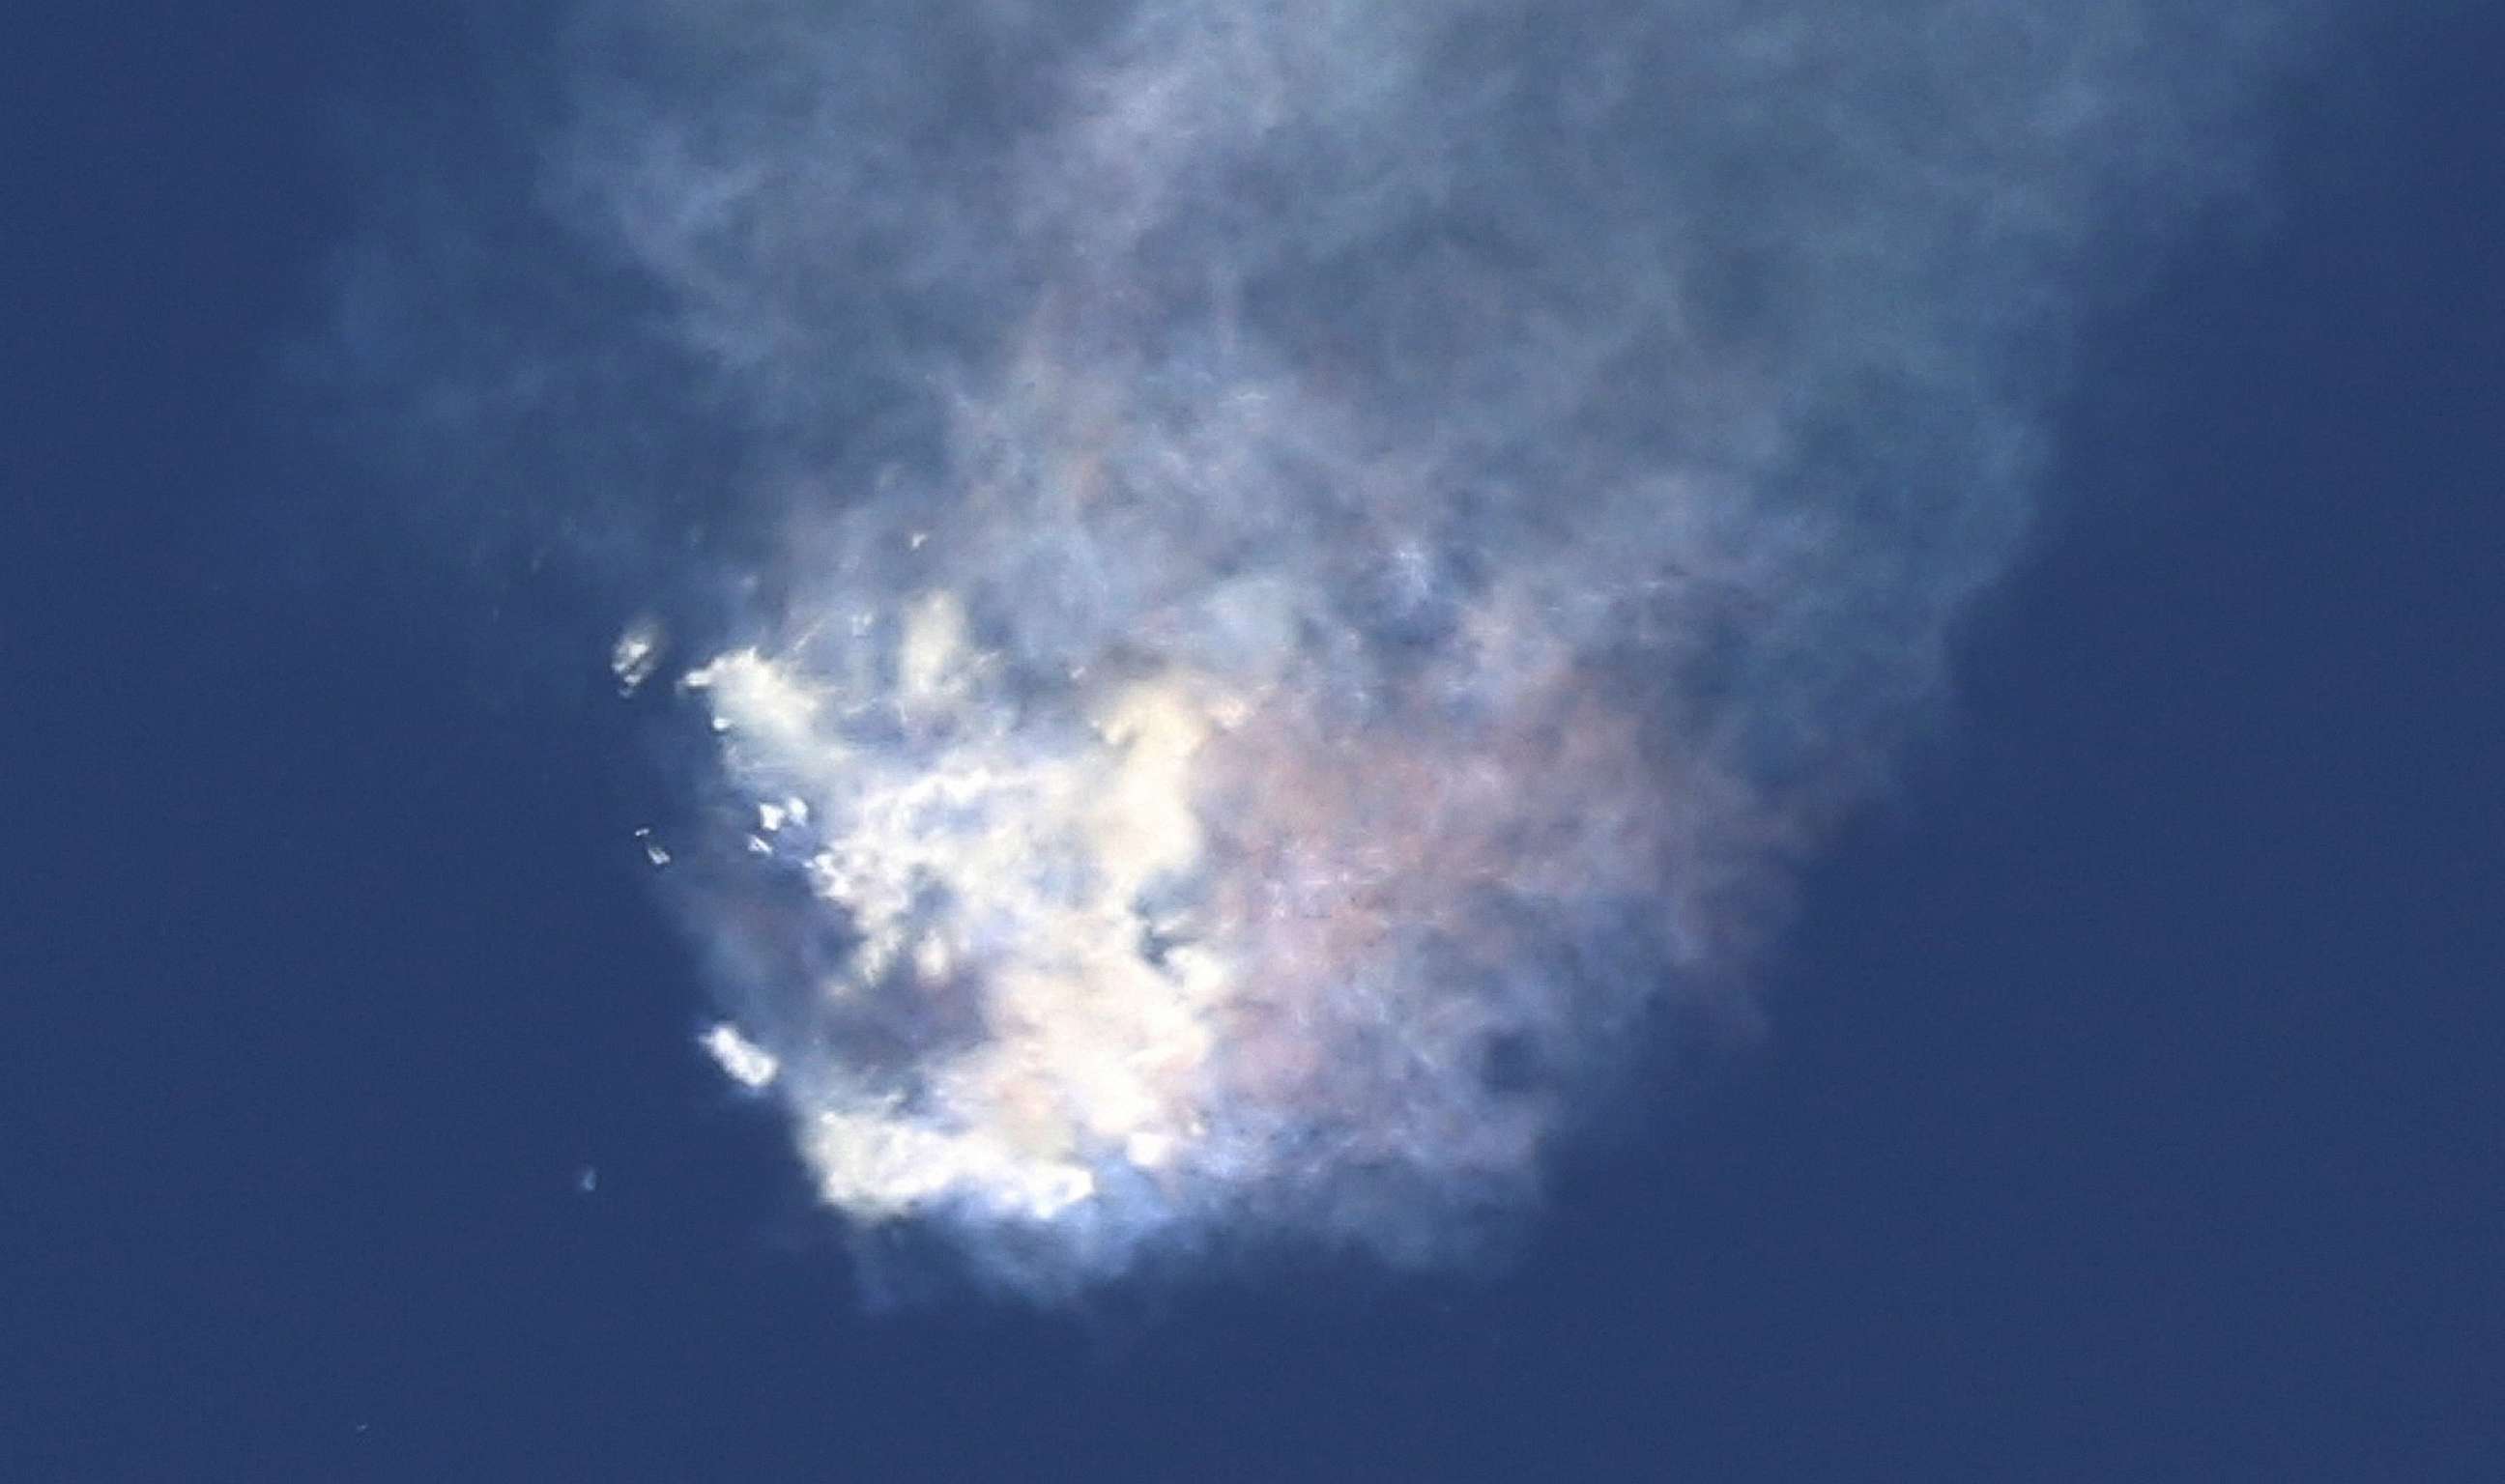 PHOTO: A SpaceX Falcon 9 rocket on its seventh official commercial resupply mission to the orbiting International Space Station breaks apart, June 28, 2015, minutes after being launched from the Cape Canaveral Air Force Station in Florida. 